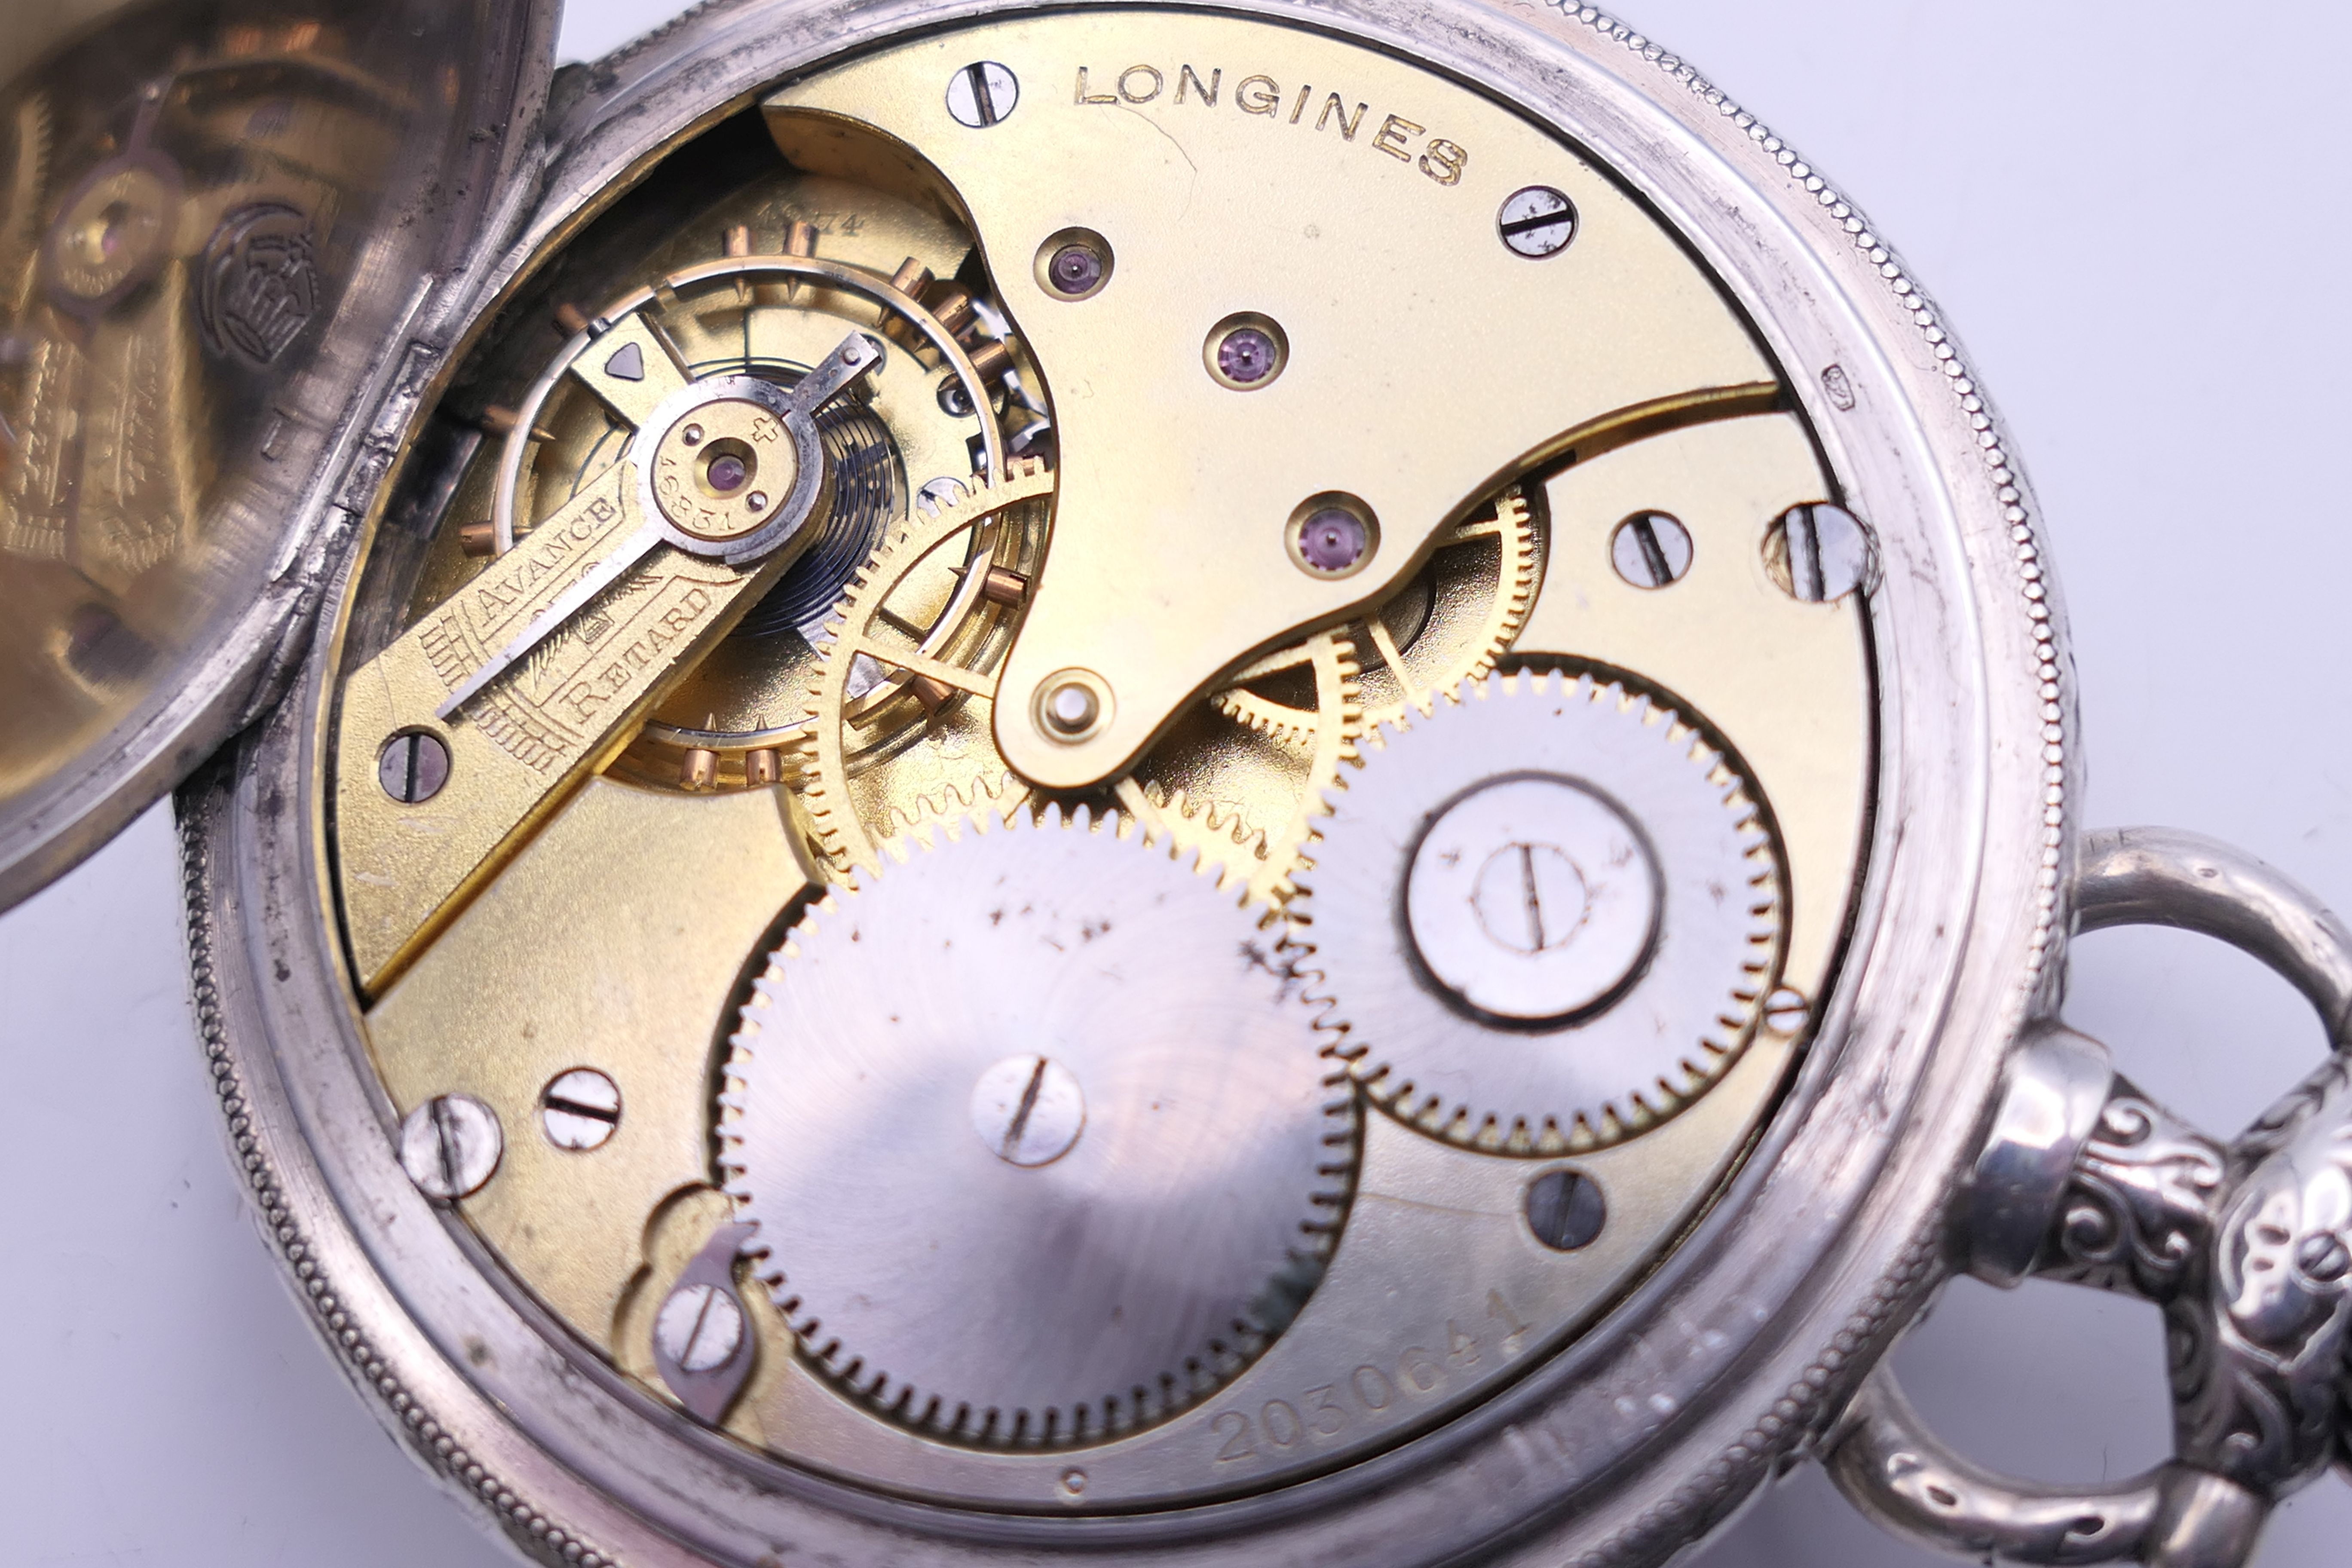 A Swiss Longines Grand Prix Paris 1900 800 silver full hunter pocket watch, serial number 2030641. - Image 9 of 9